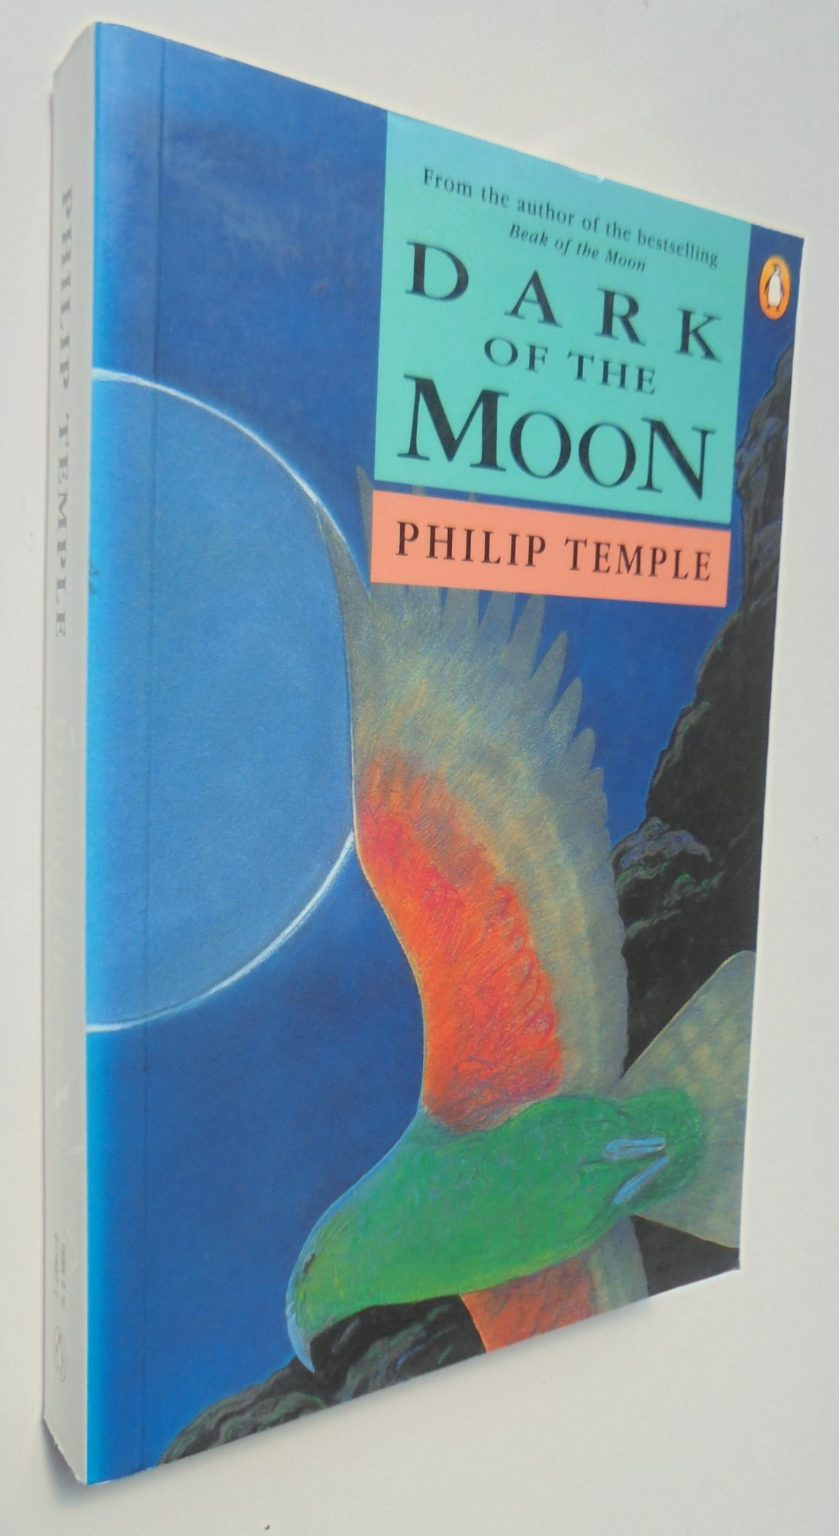 Dark Of The Moon by Philip Temple.